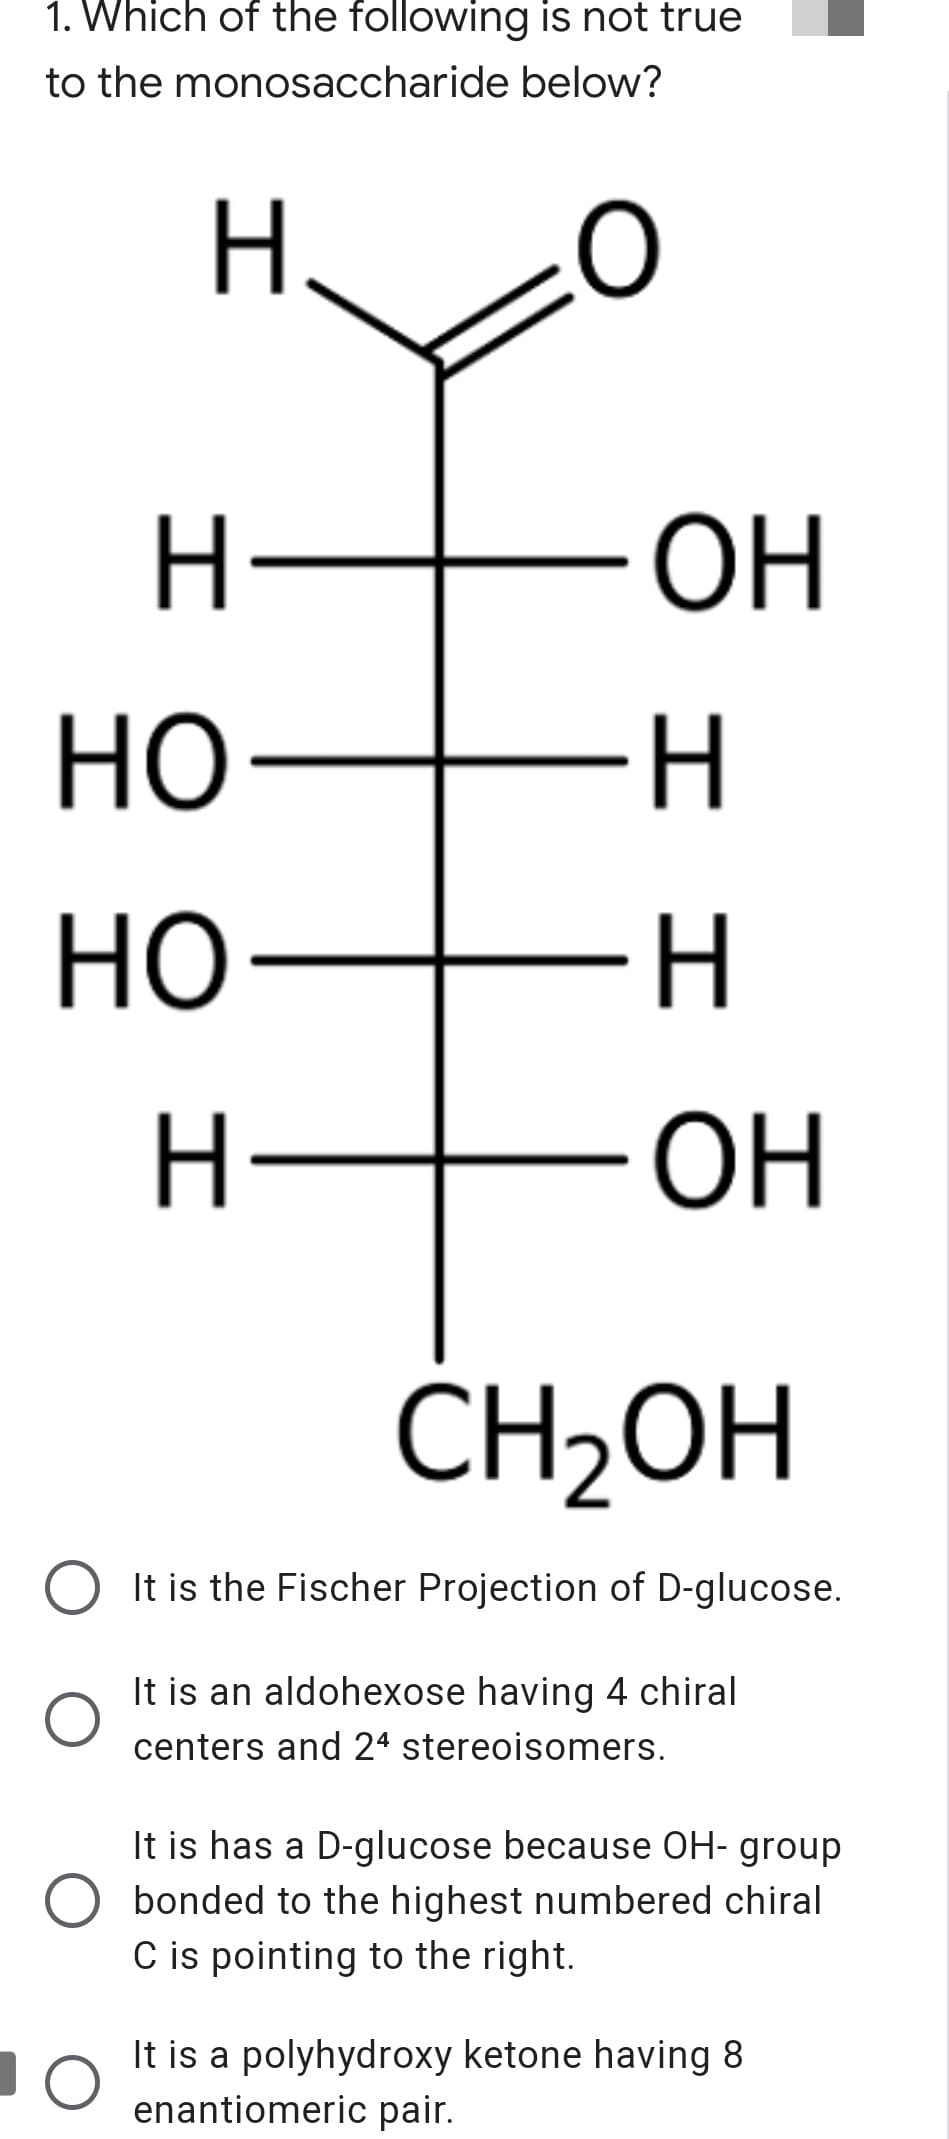 1. Which of the following is not true
to the monosaccharide below?
H.
ОН
но-
-H-
но
ОН
ĆH2OH
O It is the Fischer Projection of D-glucose.
It is an aldohexose having 4 chiral
centers and 24 stereoisomers.
It is has a D-glucose because OH- group
bonded to the highest numbered chiral
C is pointing to the right.
It is a polyhydroxy ketone having 8
enantiomeric pair.
